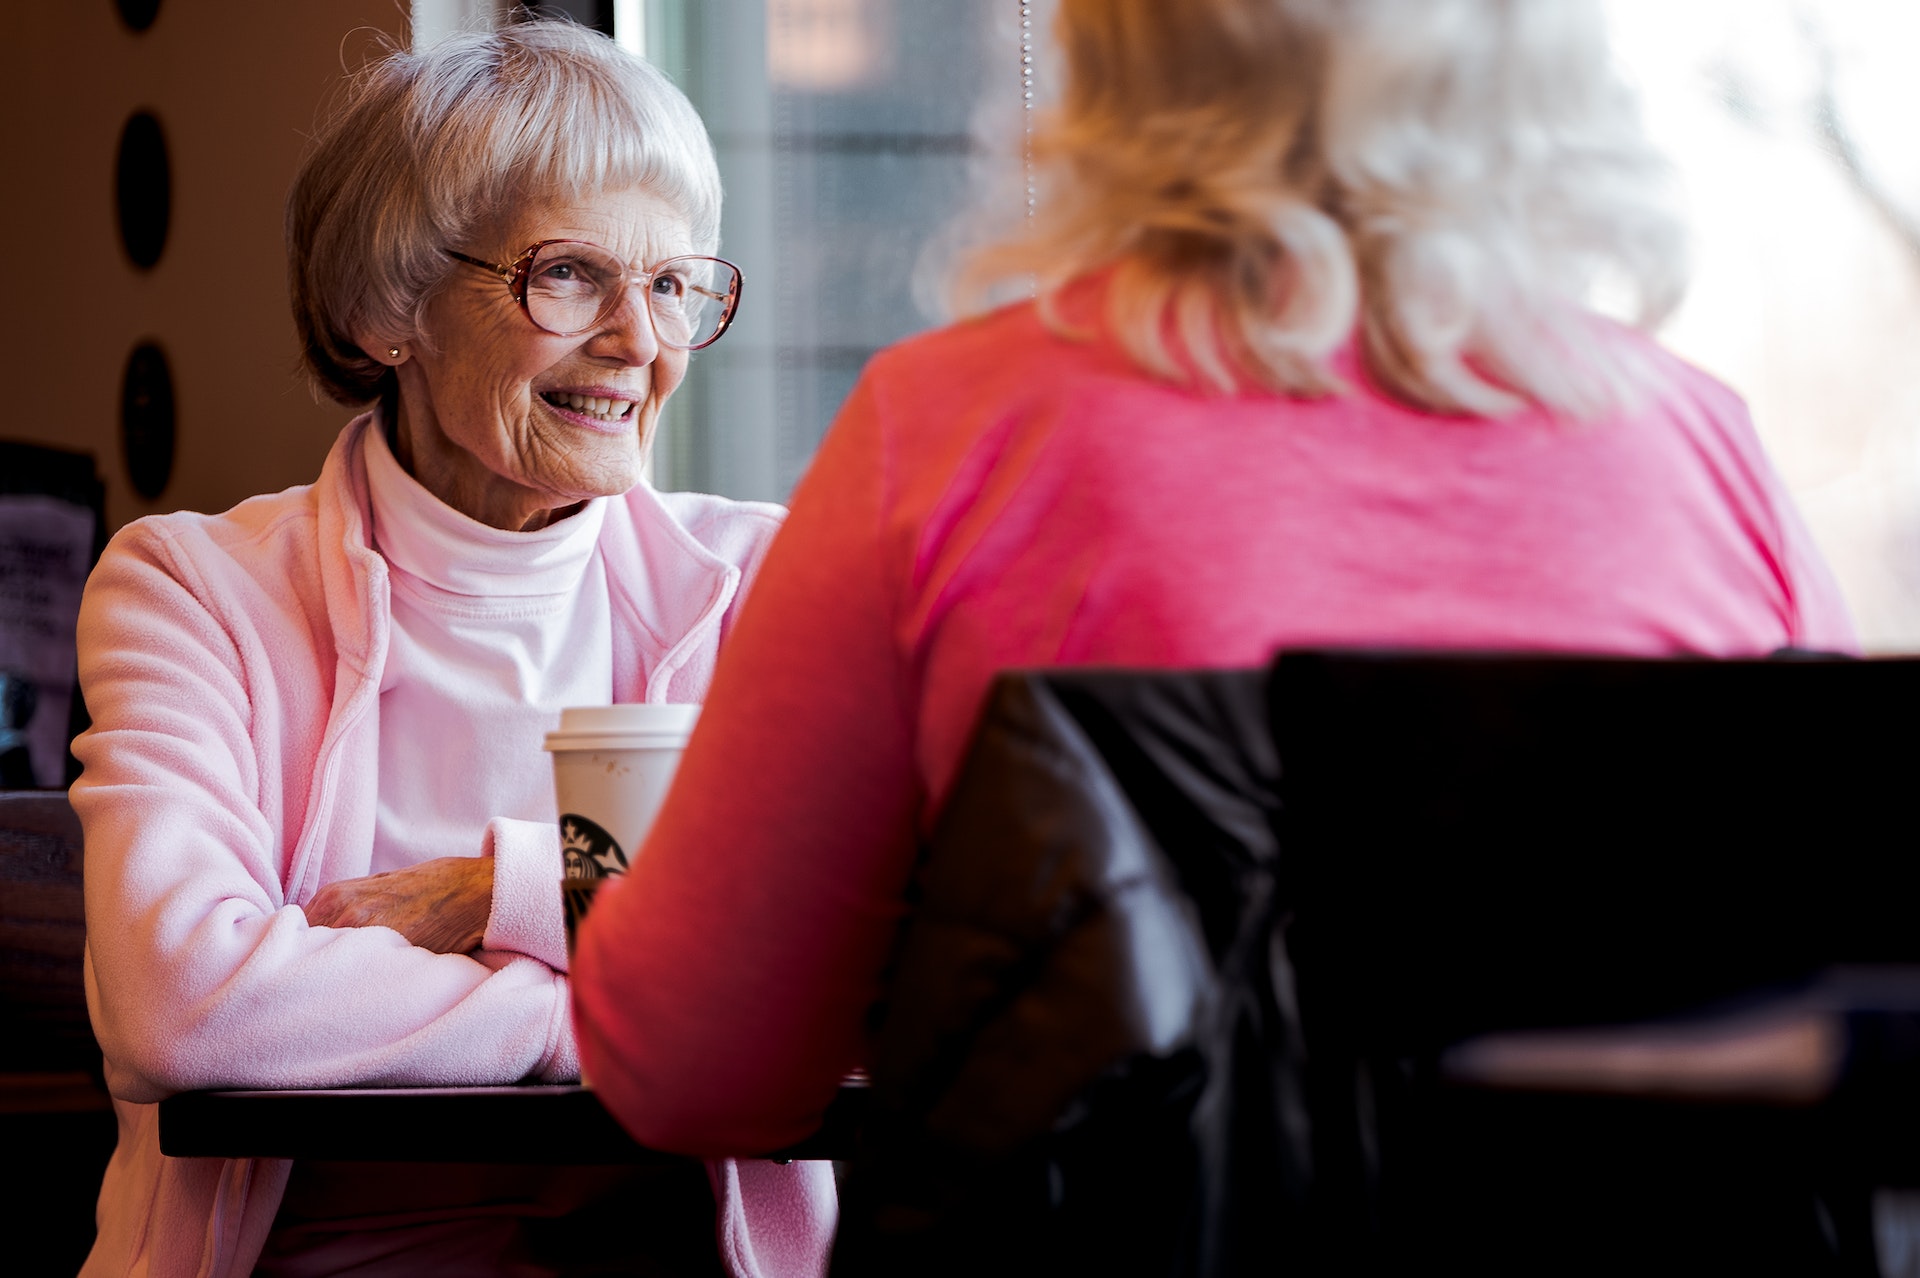 A senior lady talking to another woman in a cafe | Source: Pexels